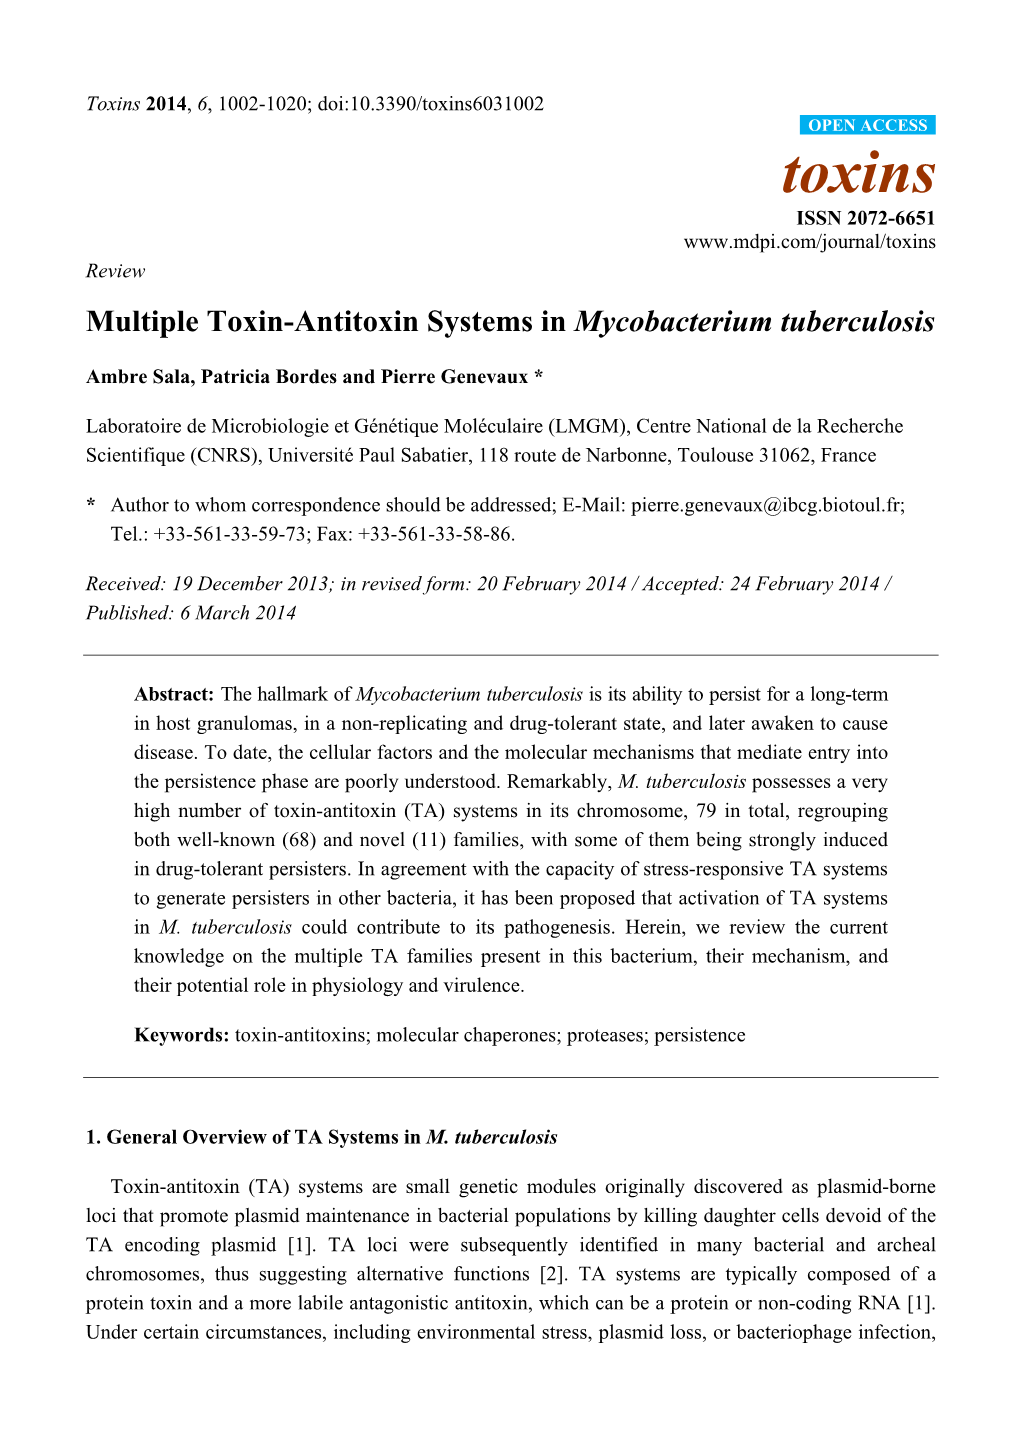 Multiple Toxin-Antitoxin Systems in Mycobacterium Tuberculosis